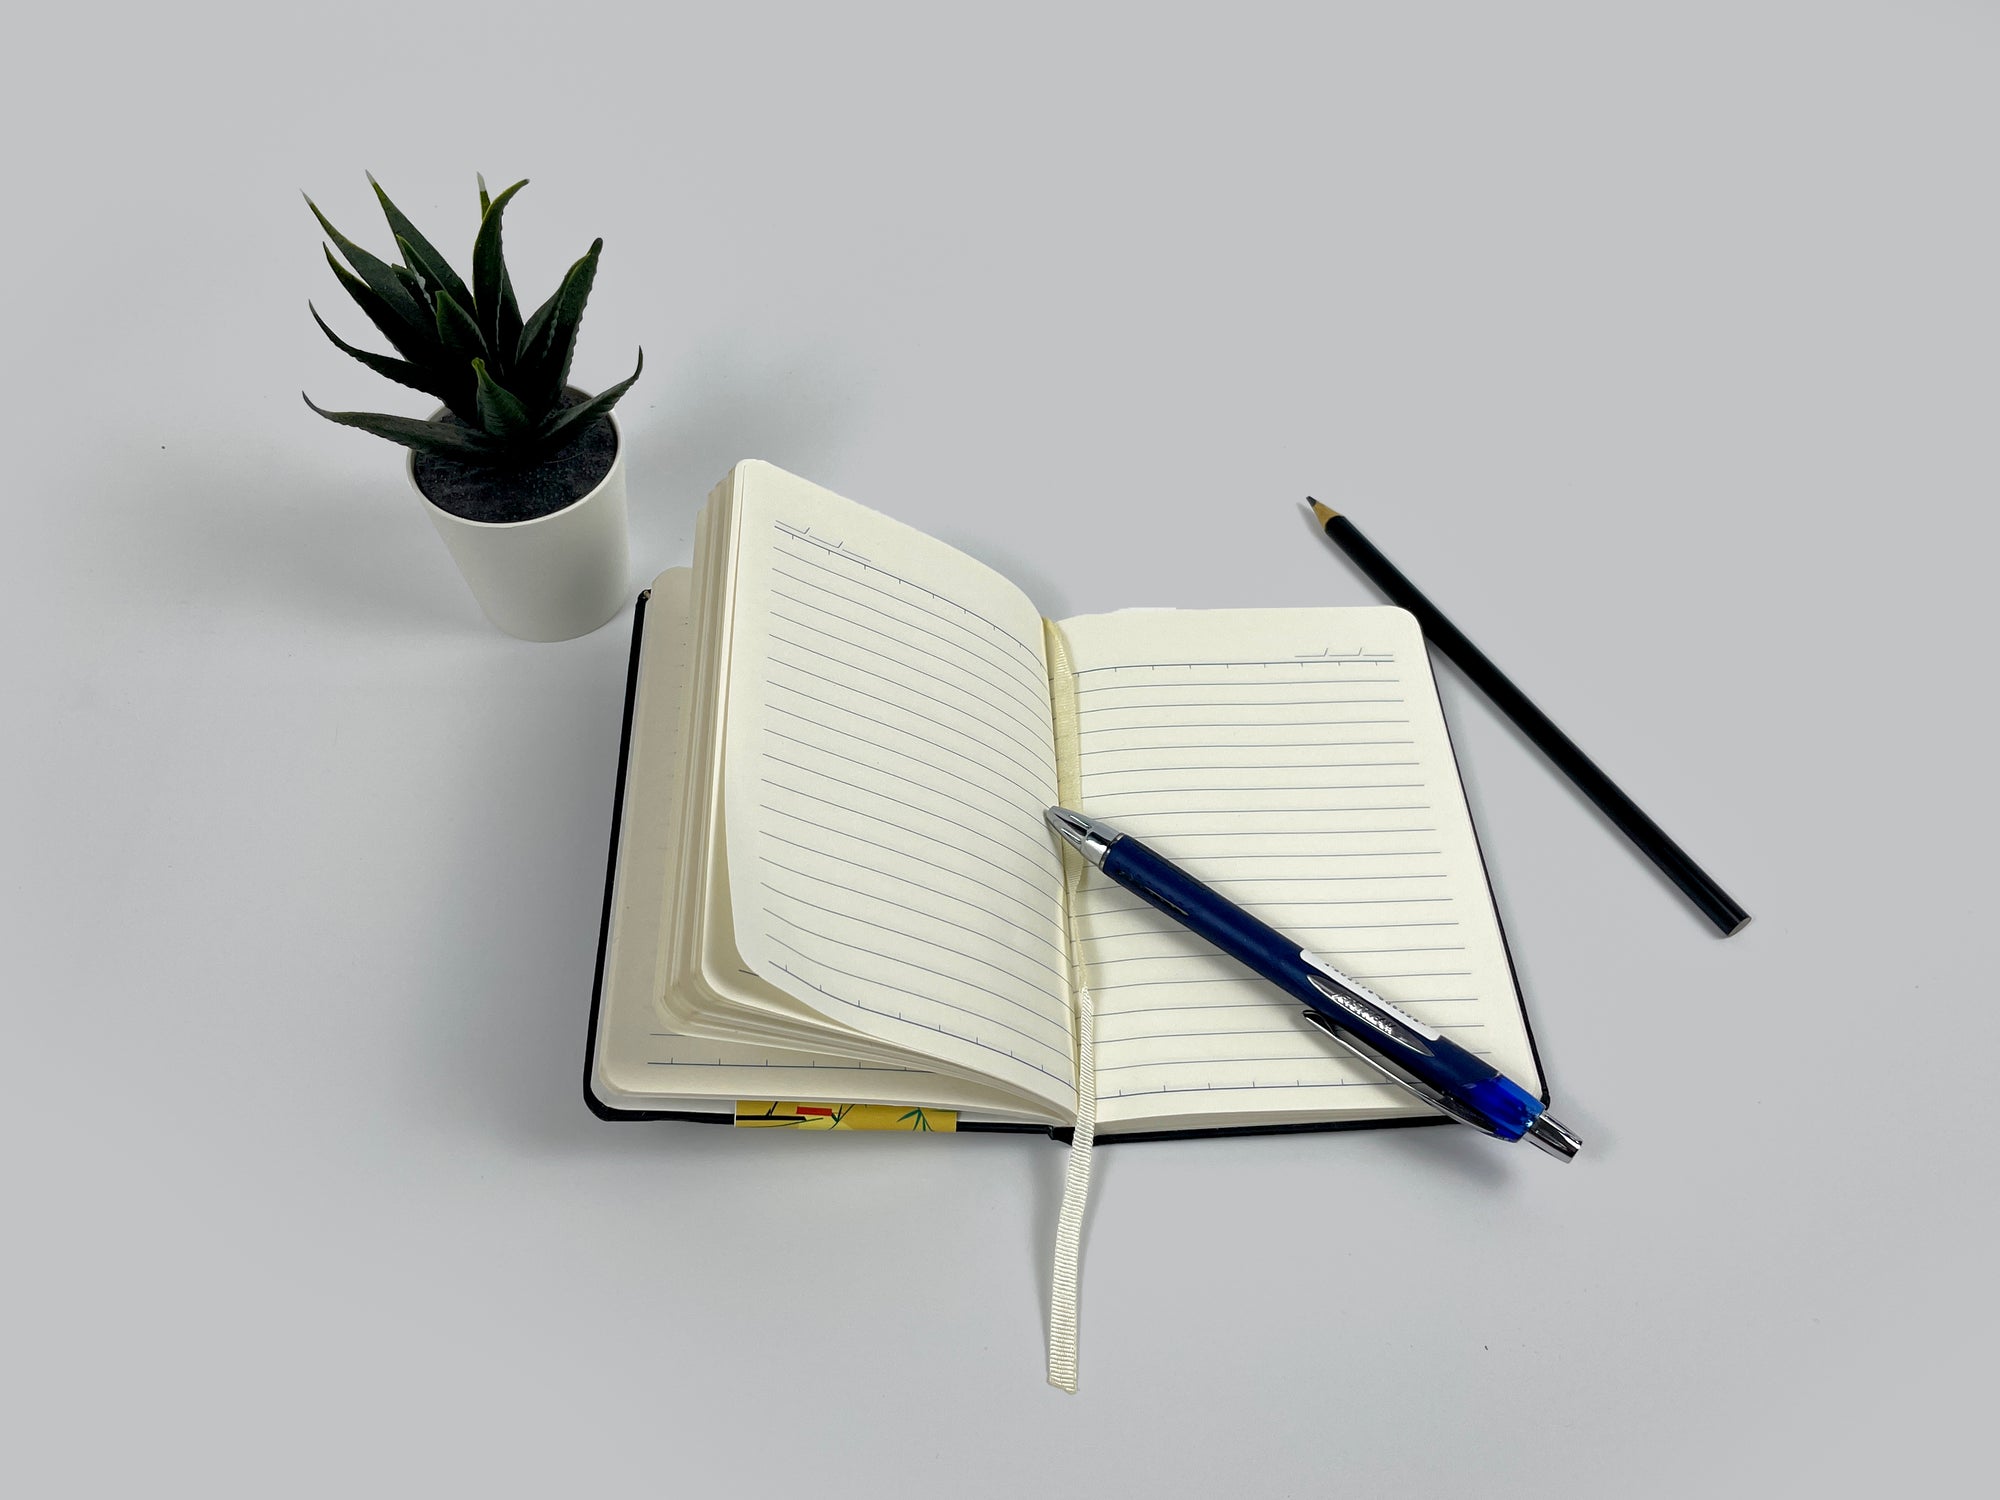 Kiyome SHIKO Notebook | Matte Hard Cover | 80 GSM | A6 | 160 Ruled Pages